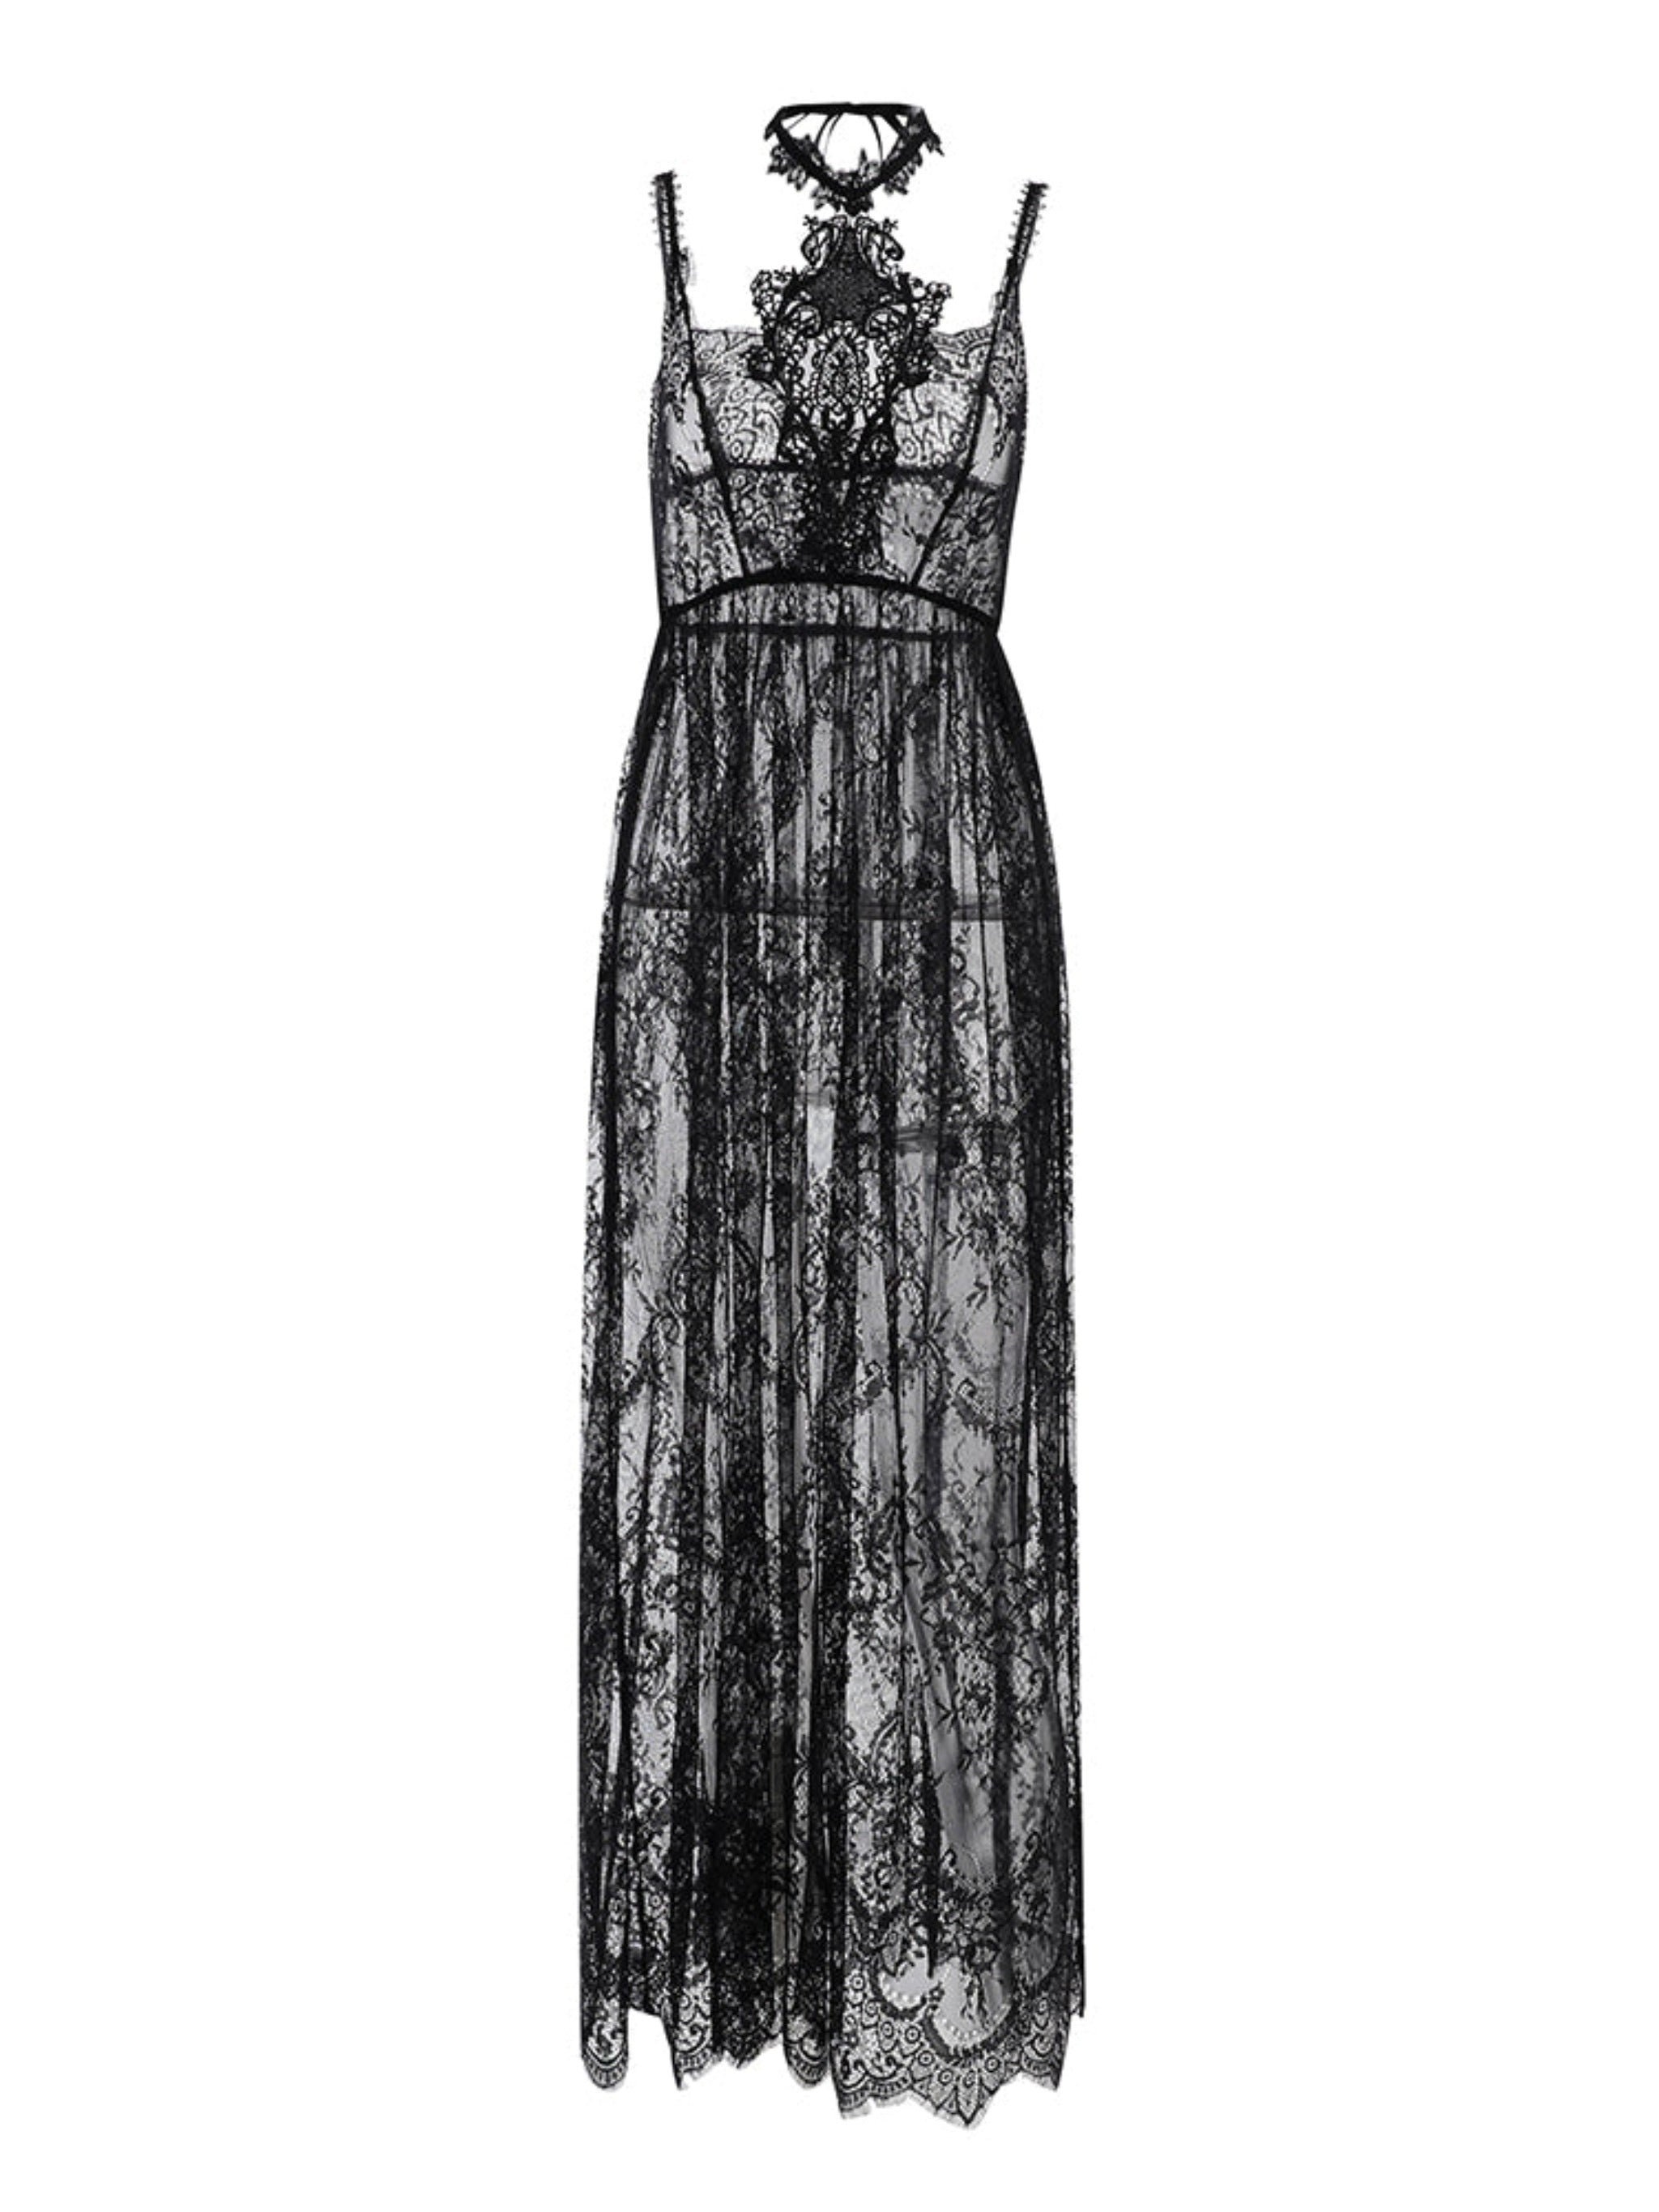 Gothic Lace High Waist Maxi Dress With Choker - Etsy